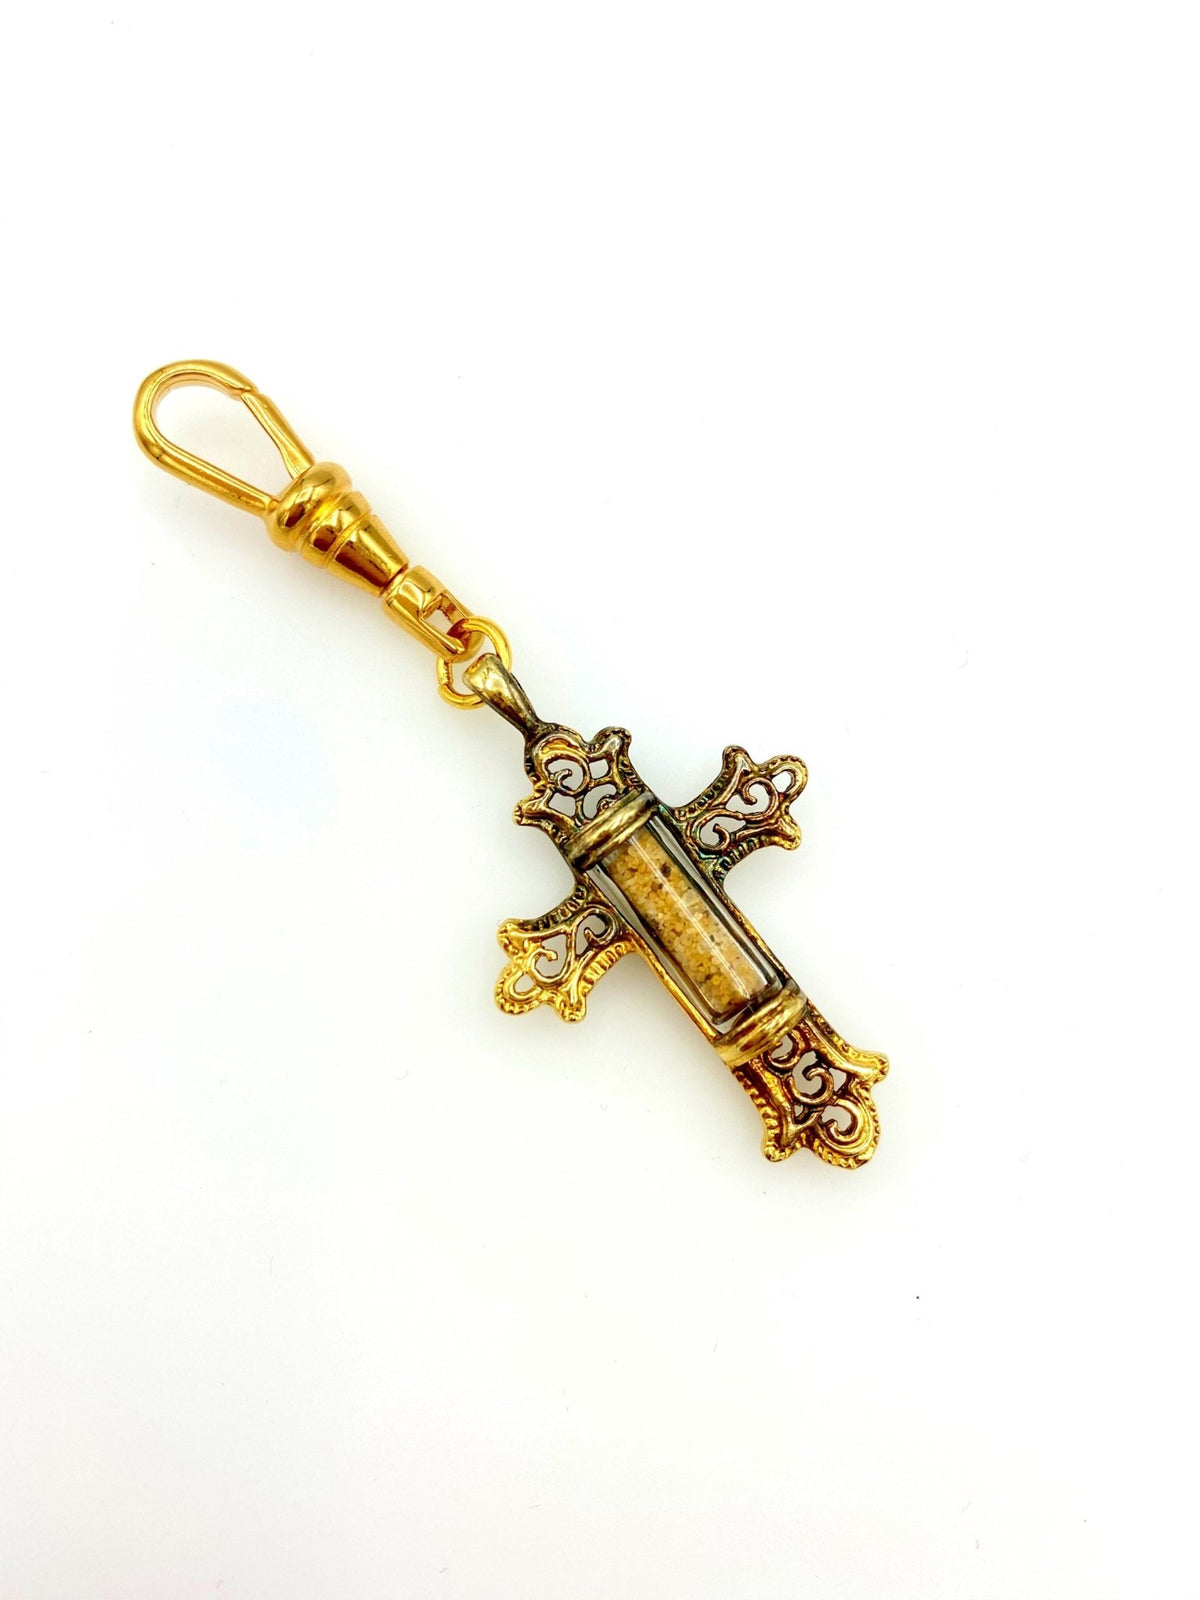 Gold Filigree Style Cross Charm - 24 Wishes Vintage Jewelry